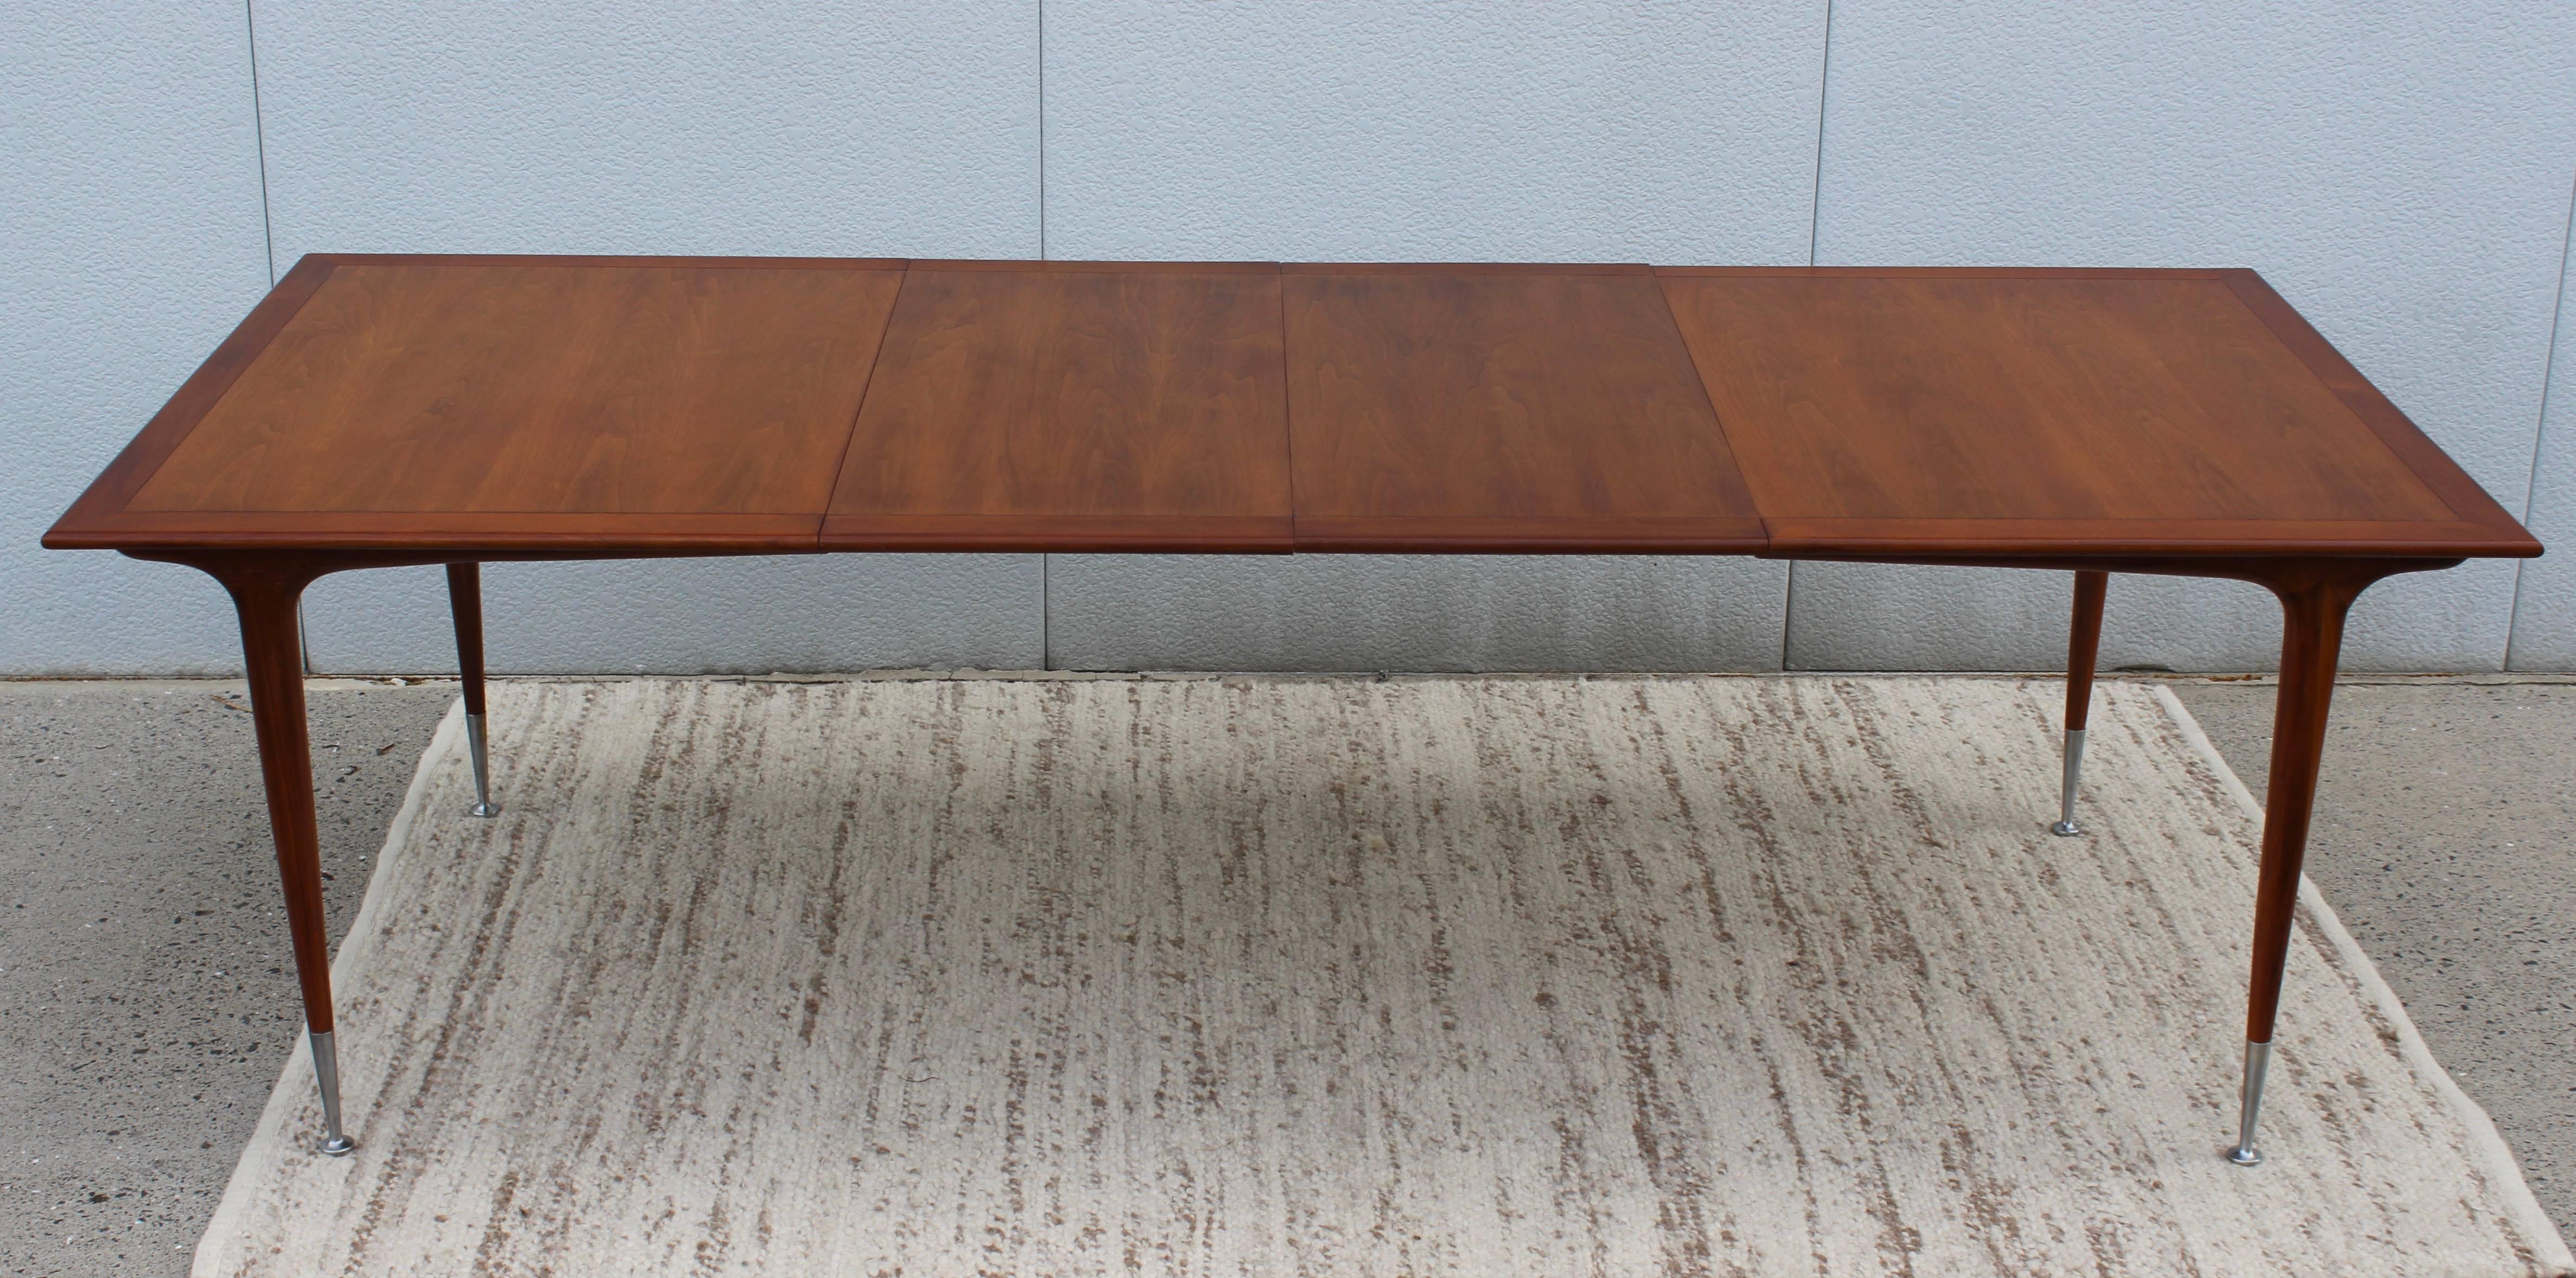 Stunning 1950s modernist walnut dining table with two leaves and aluminum sabots. 

Length without the leaves 60''.